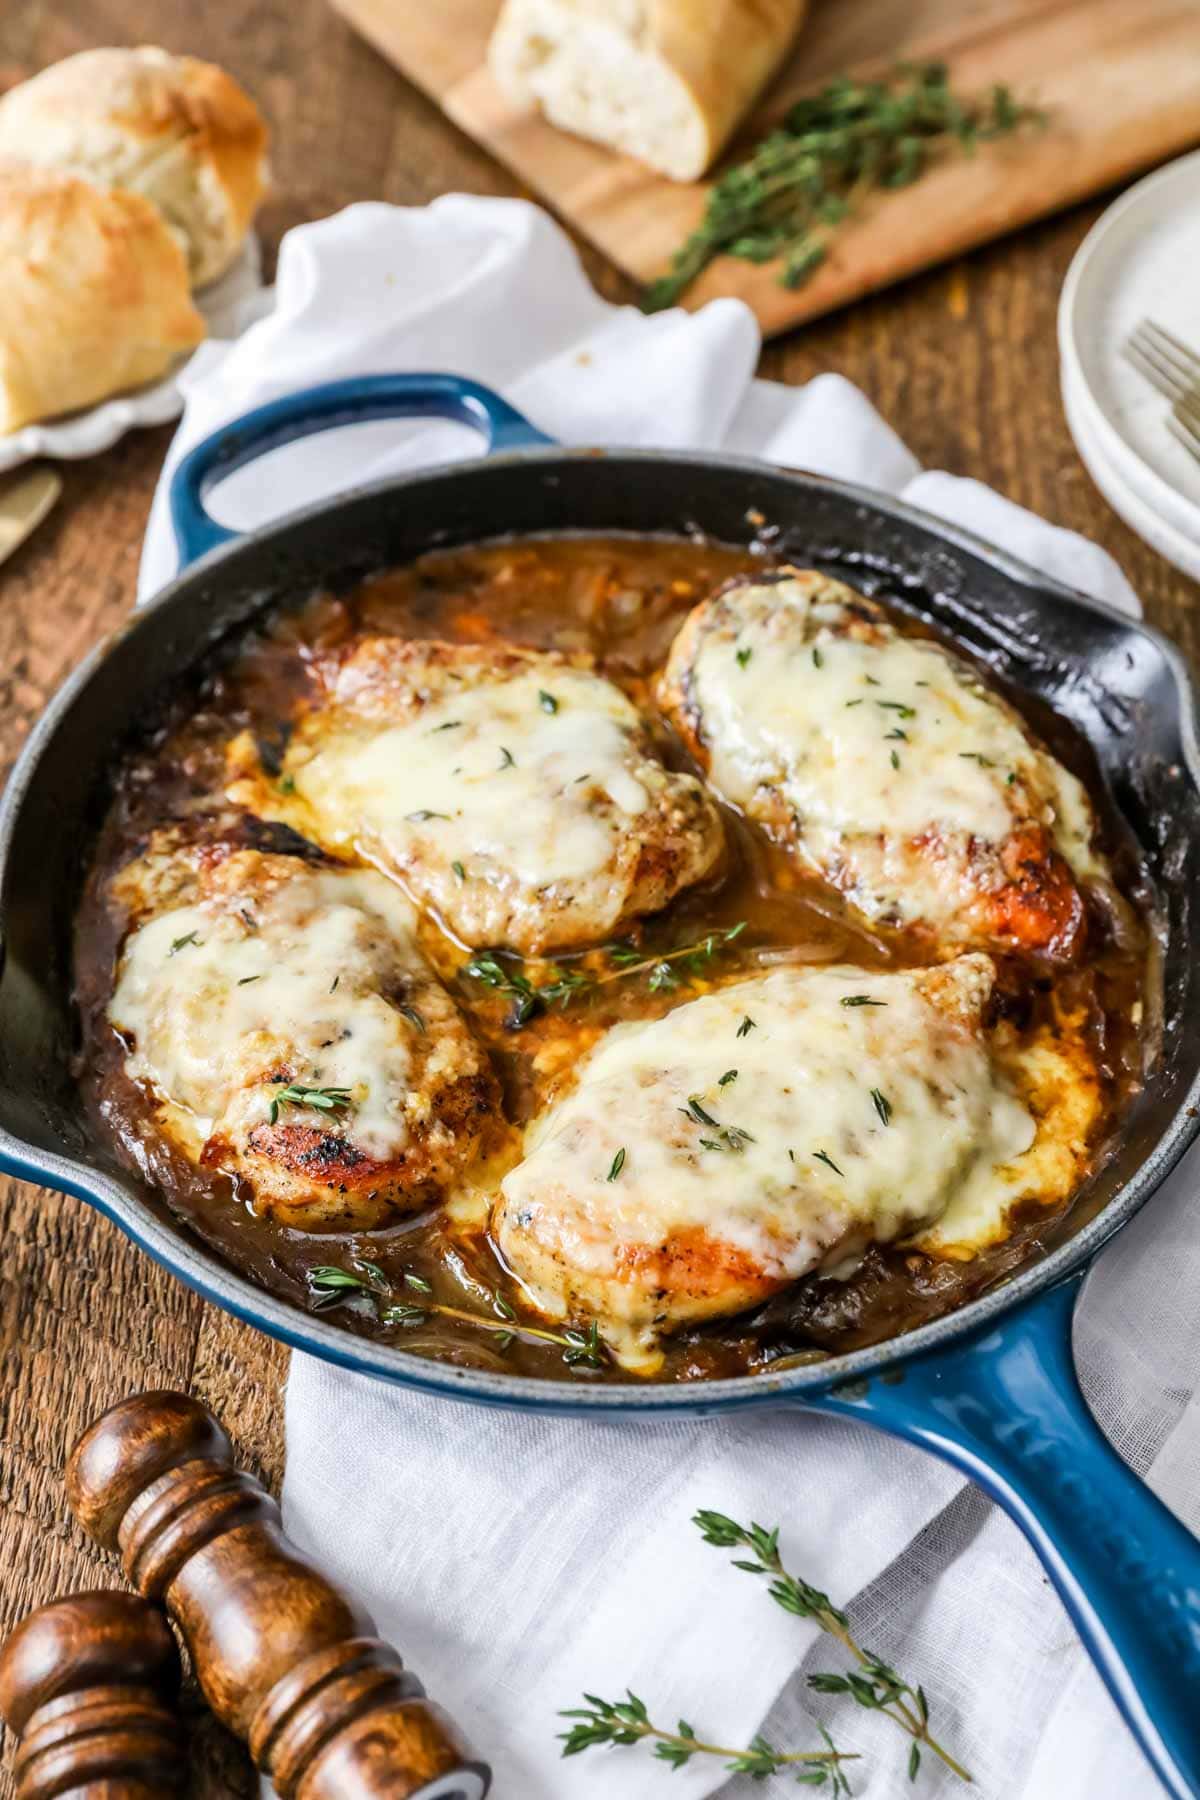 Cast iron skillet with chicken breasts in an onion sauce topped with melted cheese.